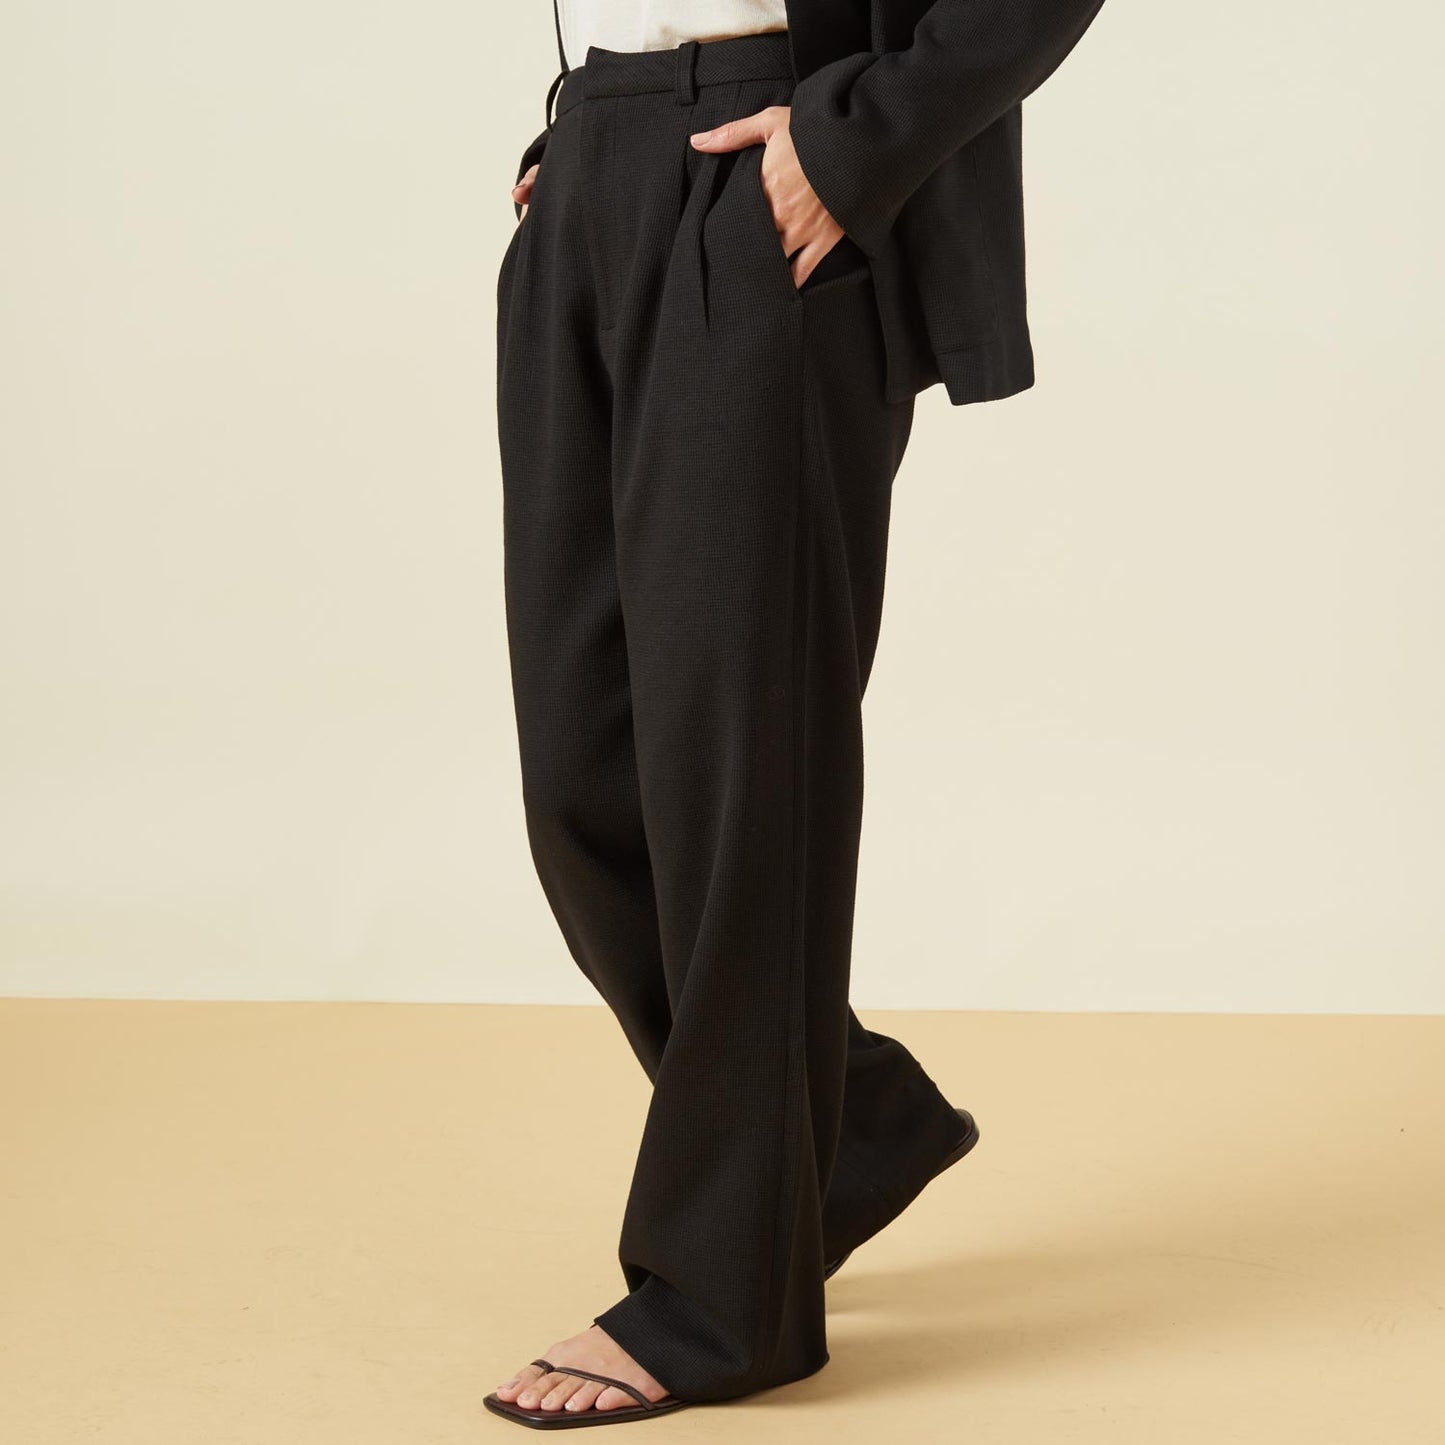 Side view of model wearing the bonded thermal pleated pants in black.